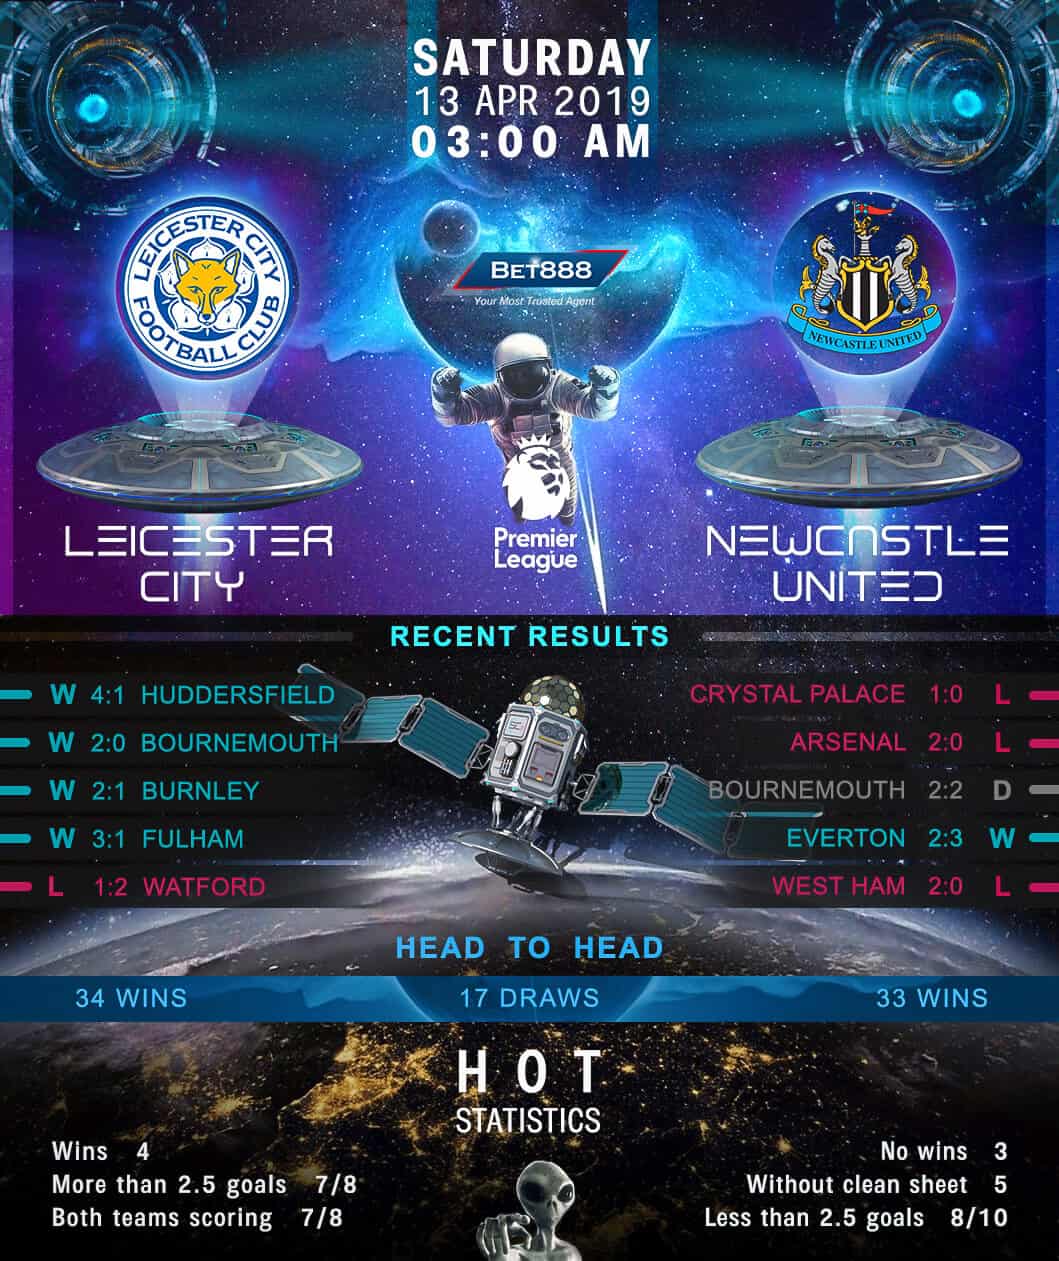 Leicester City vs Newcastle United 13/04/19